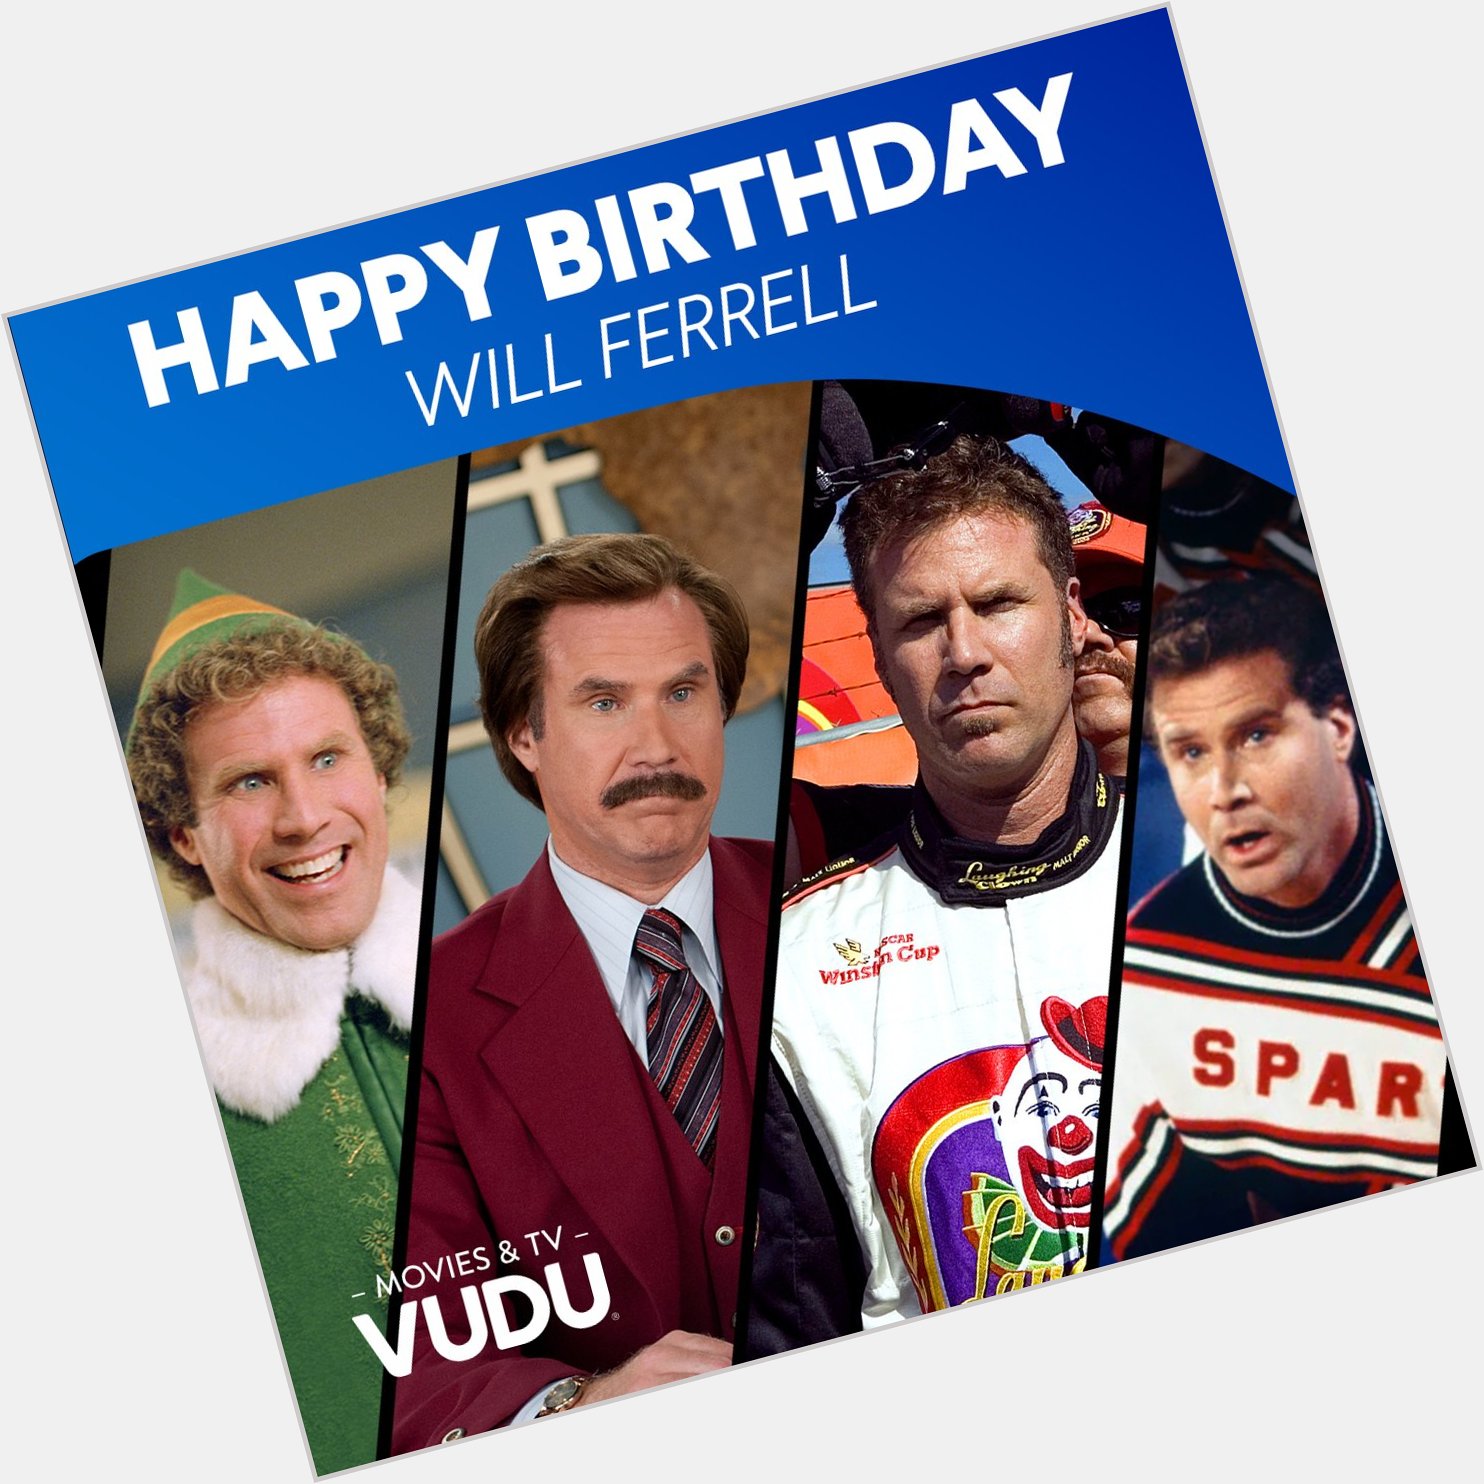 Happy birthday Will Ferrell! Out of his 122 acting credits, which one is your favorite? 